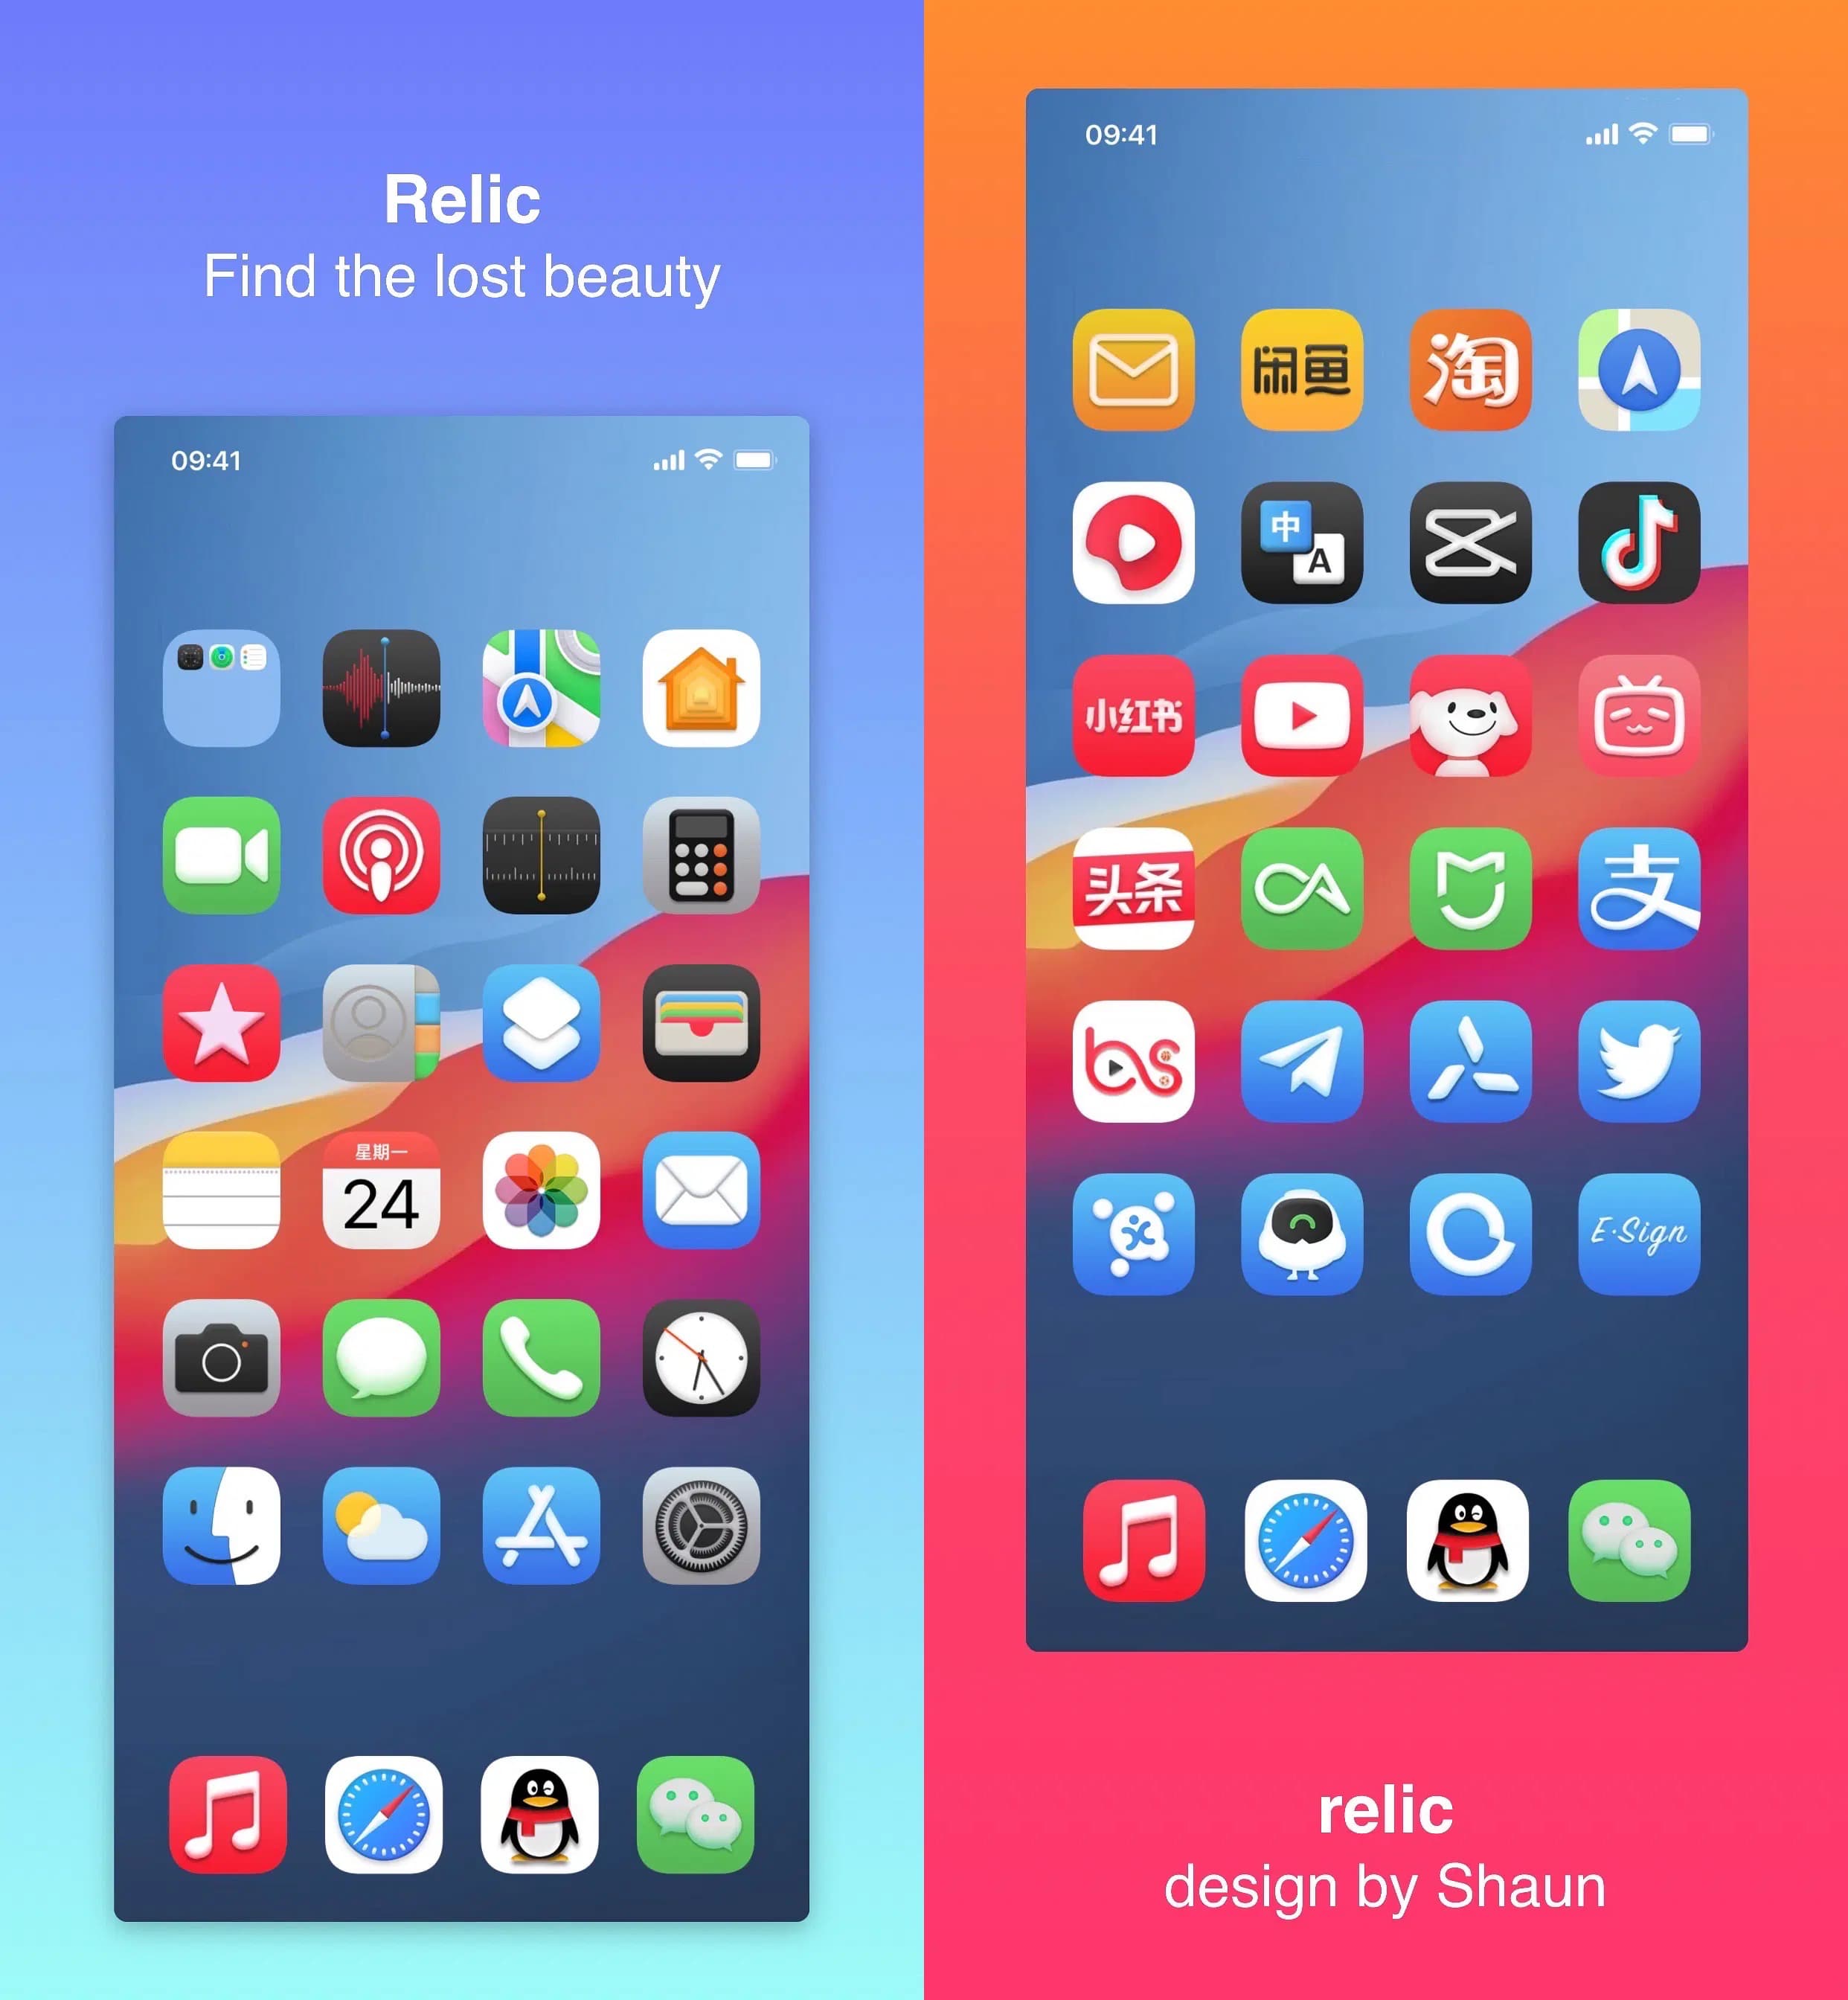 Relic theme for iPhone and iPad.